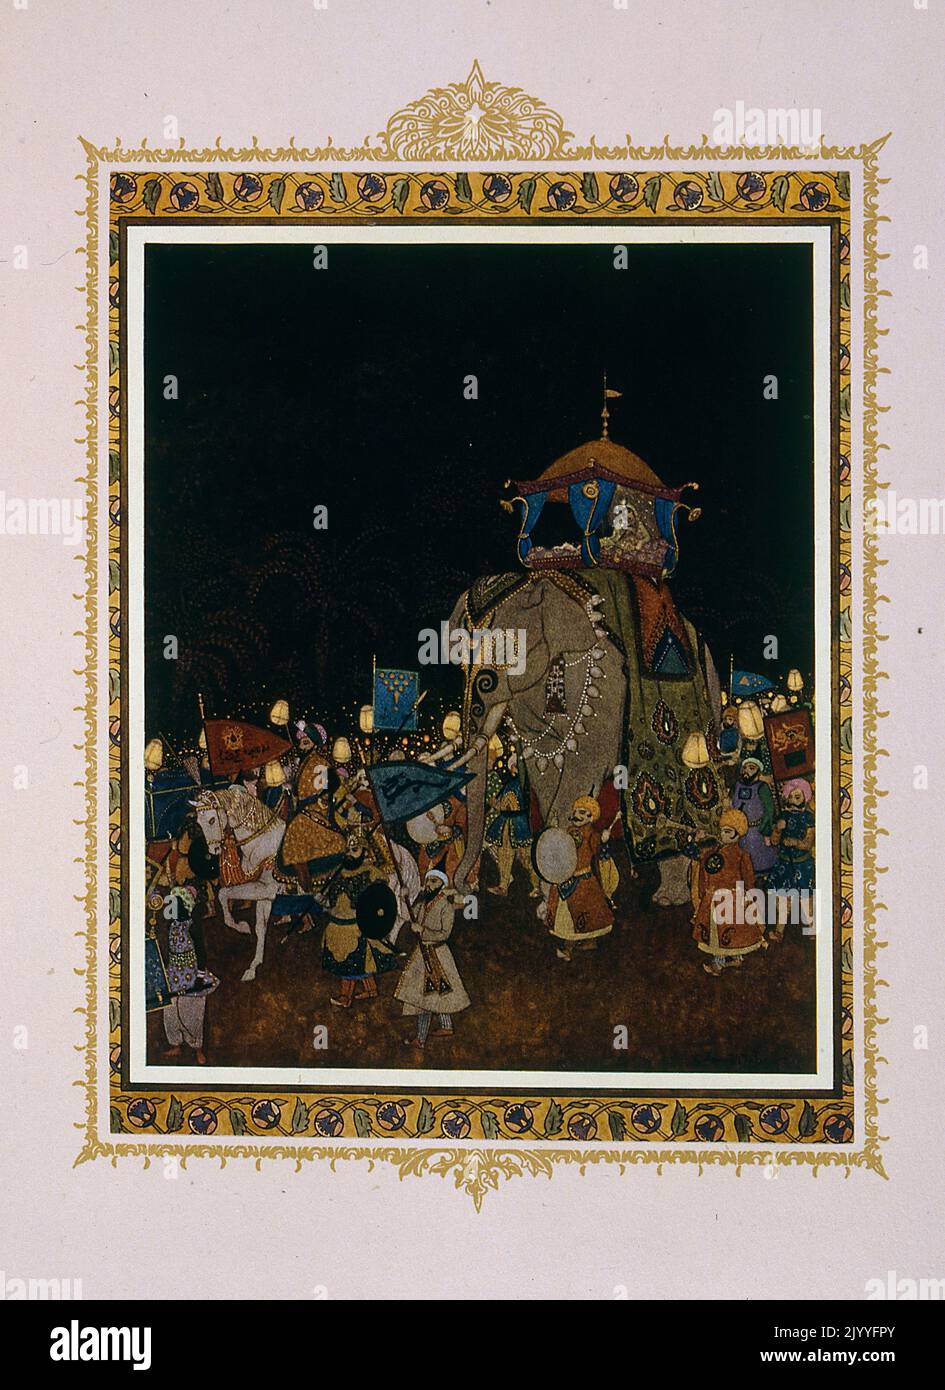 Coloured Illustration of the arrival of a parade with elephants. Illustrated by Edmund Dulac (1882-1953), a French British naturalised magazine and book illustrator. Stock Photo